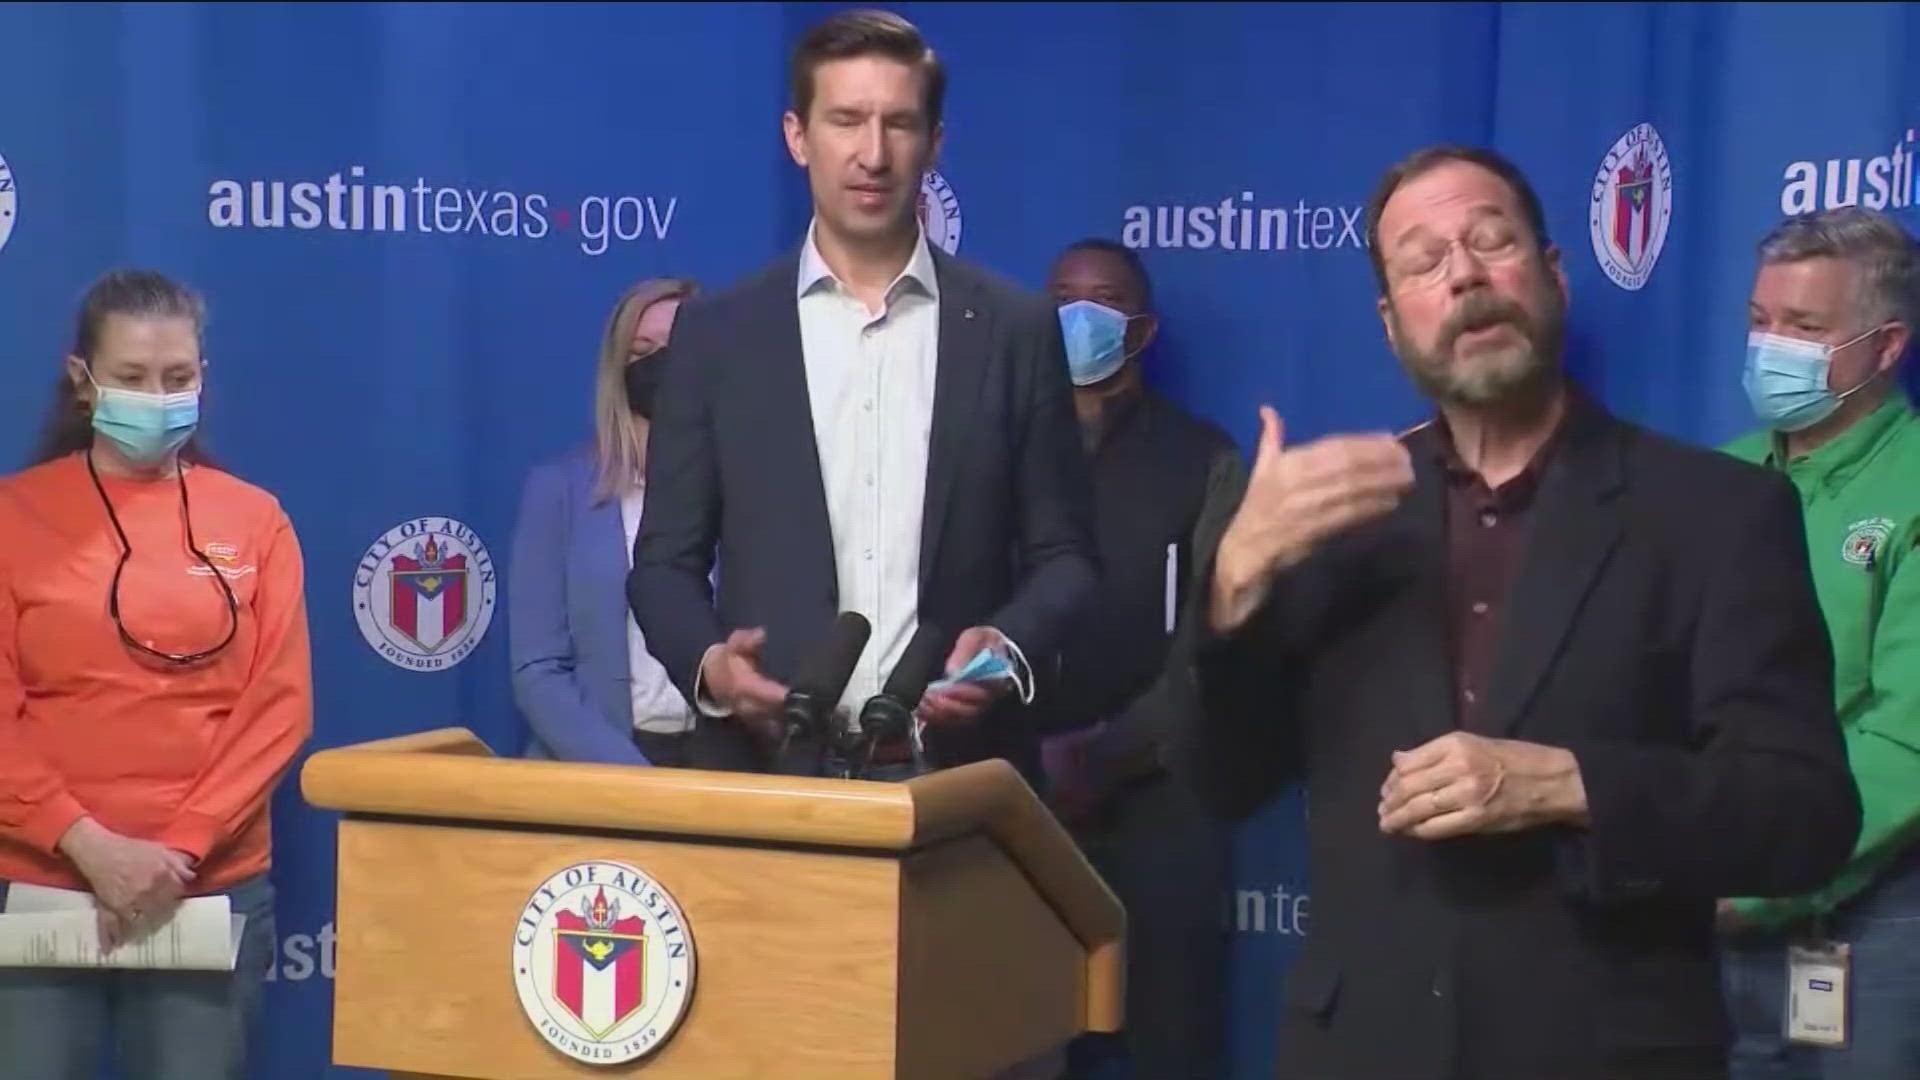 Multiple Austin City Councilmembers have confirmed that they plan to vote City Manager Spenser Cronk out of office.